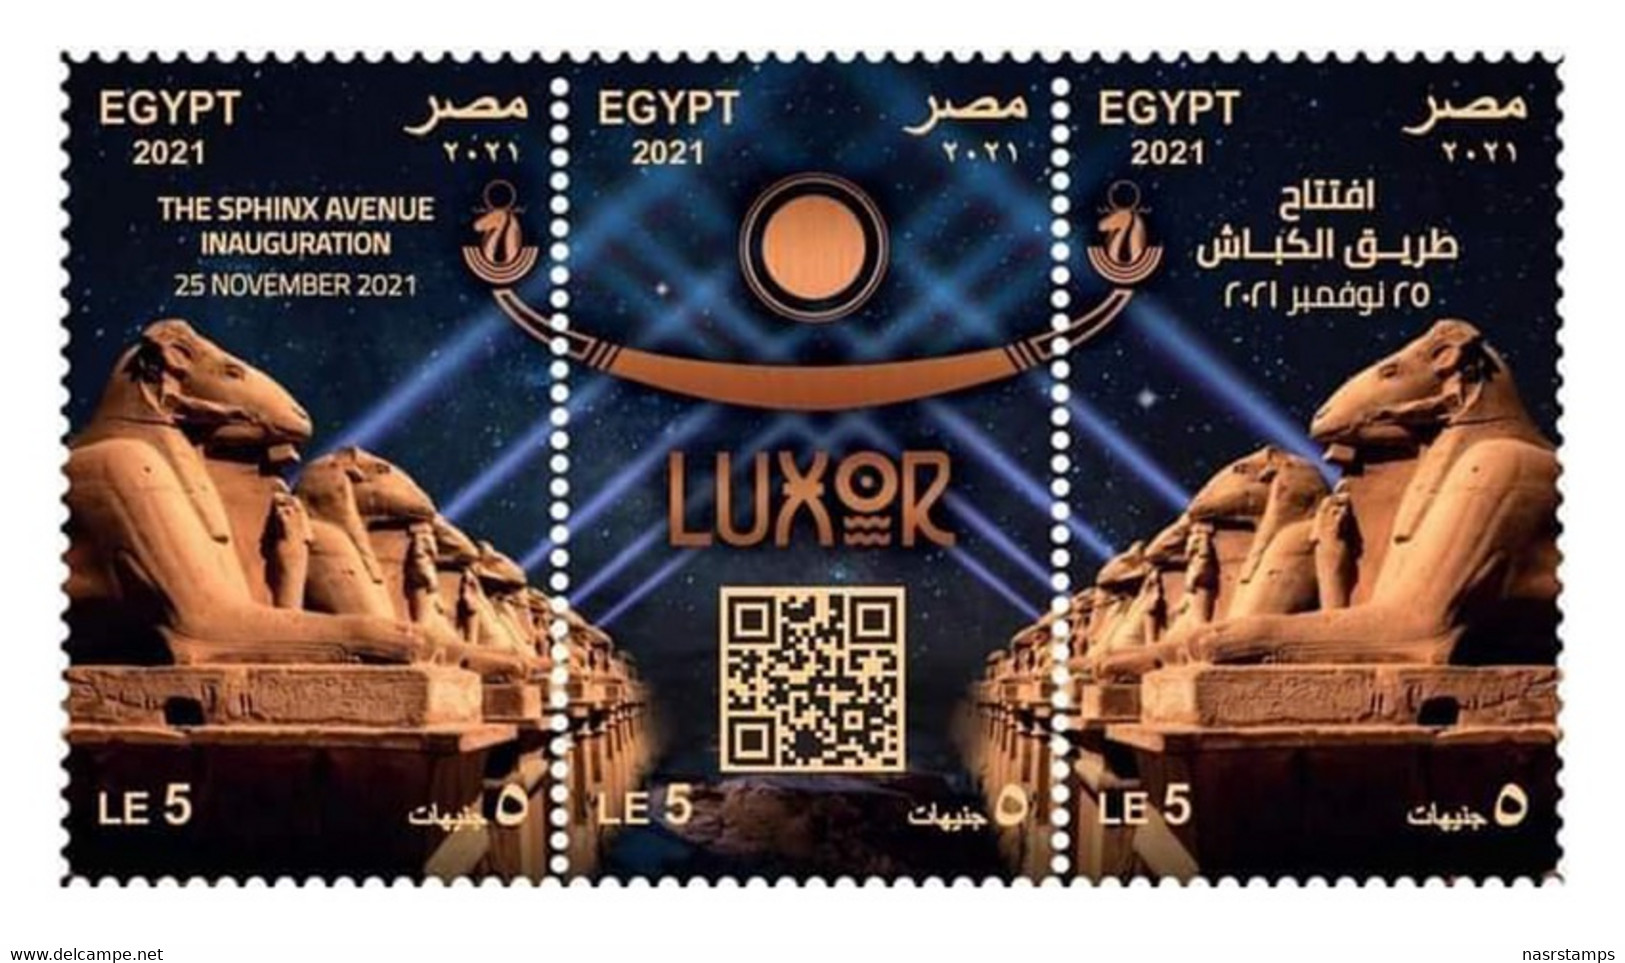 Egypt - 2021 - NEW - Complete Sheet - ( The Sphinx Avenue Inauguration - LUXOR ) - MNH** - Egyptology